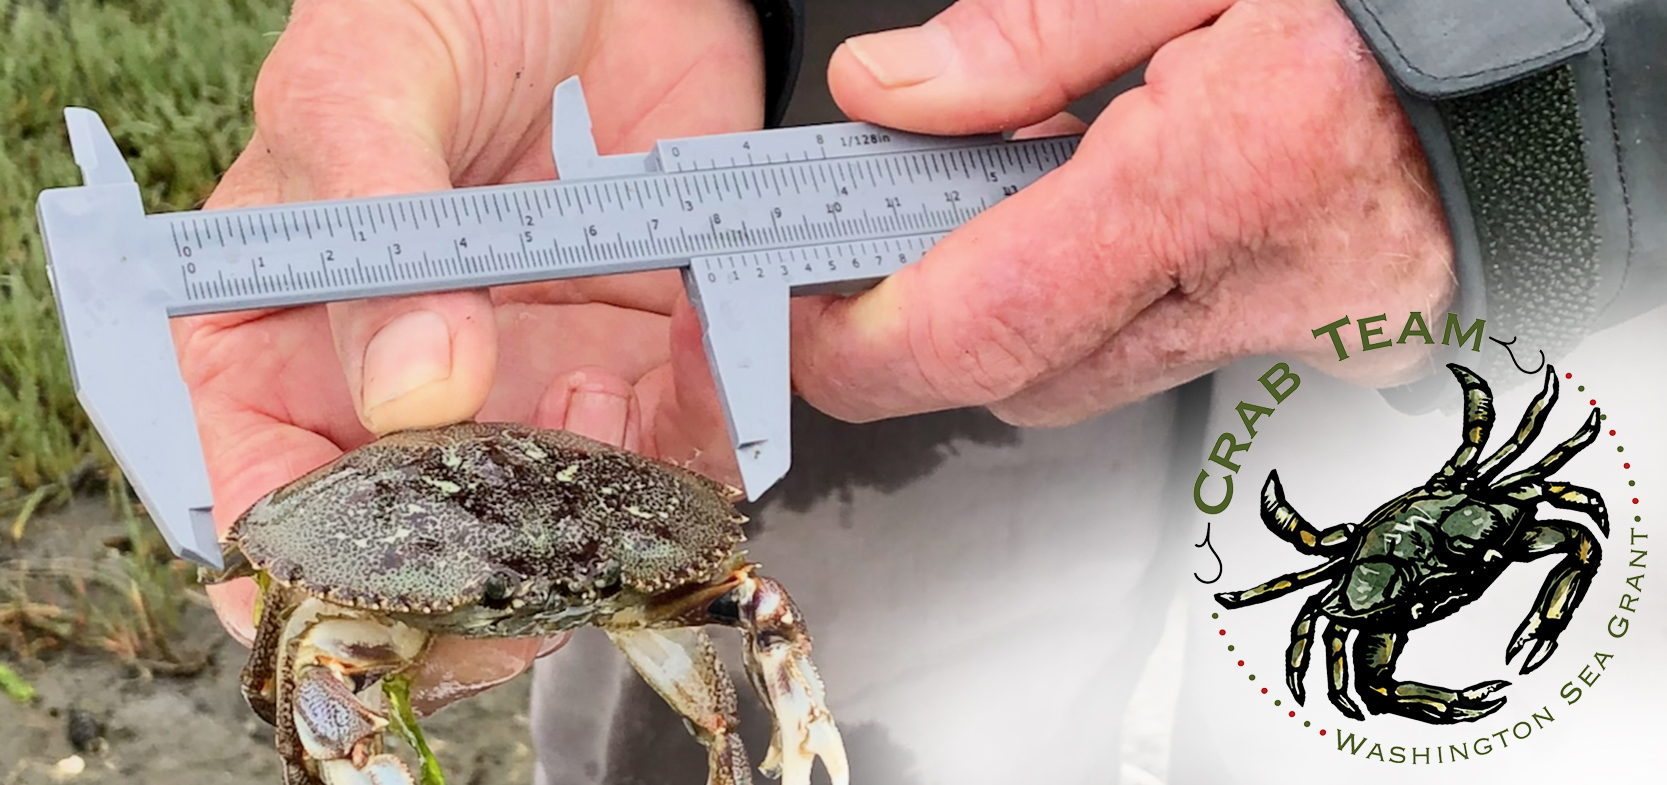 A dungeness crab getting measured with gray calipers